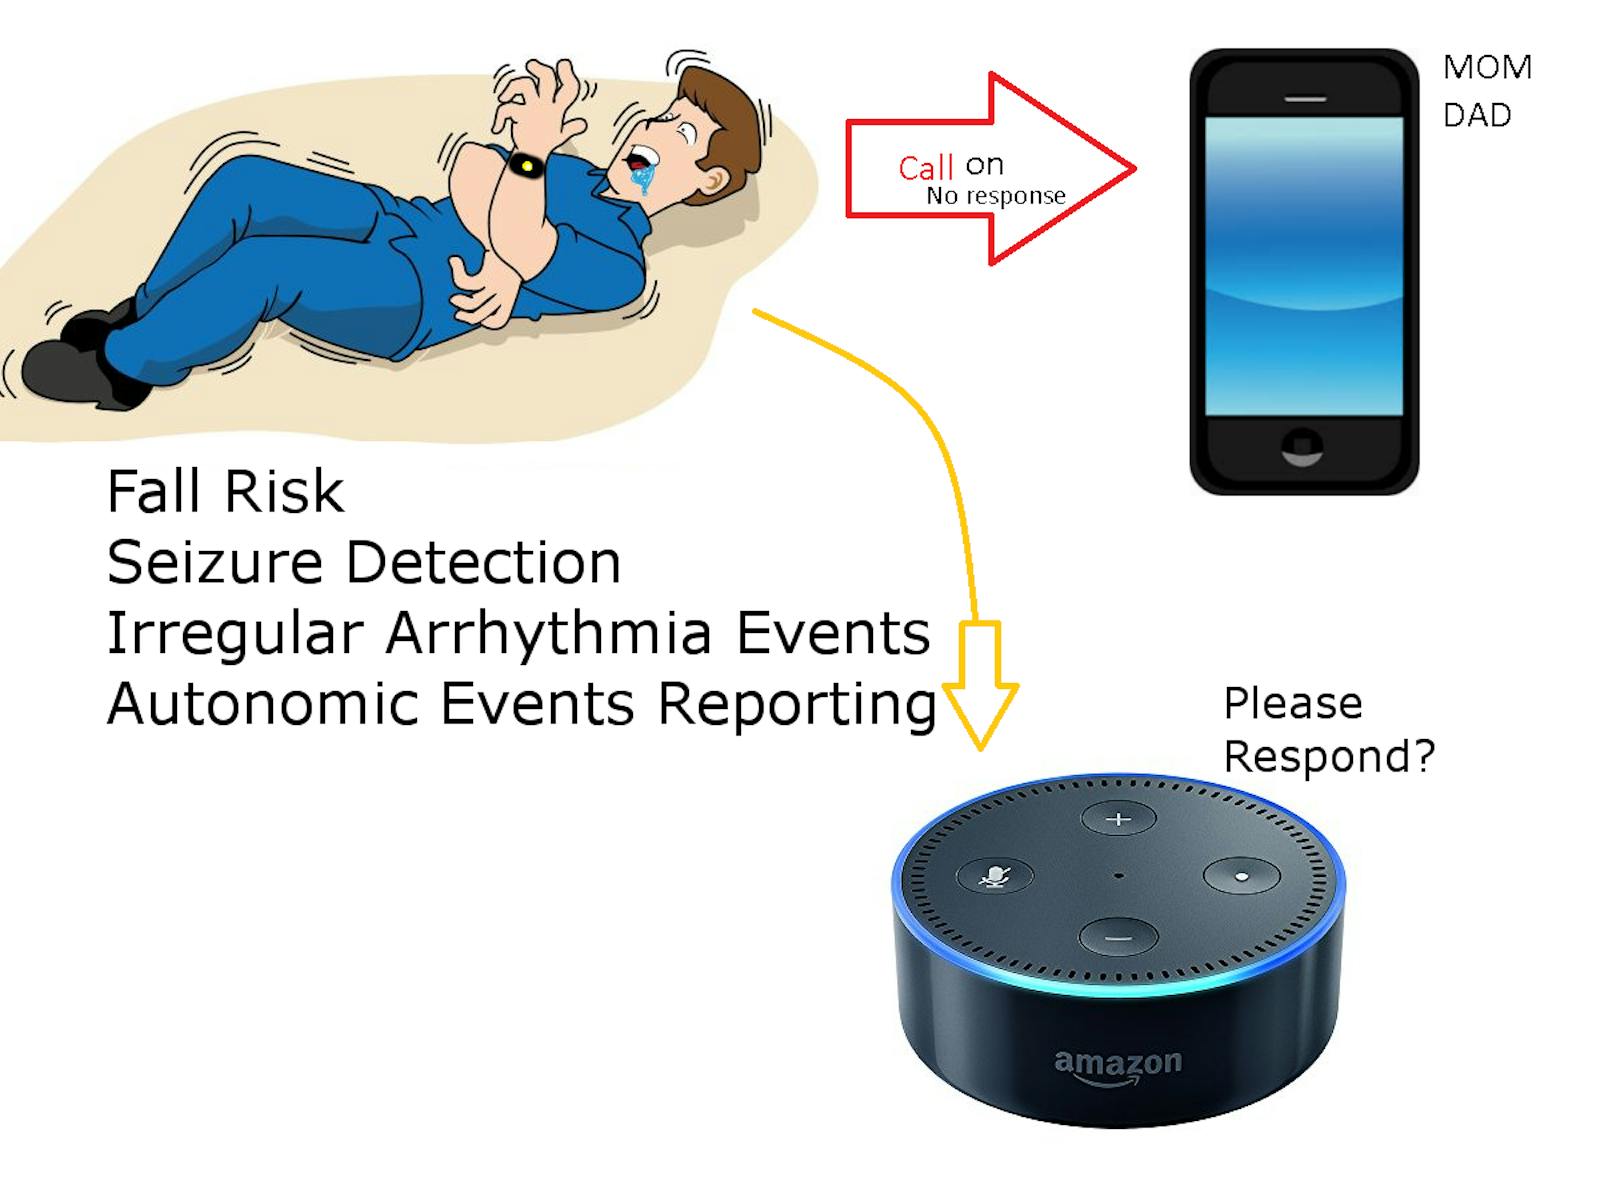 Seizure Detection and Devices